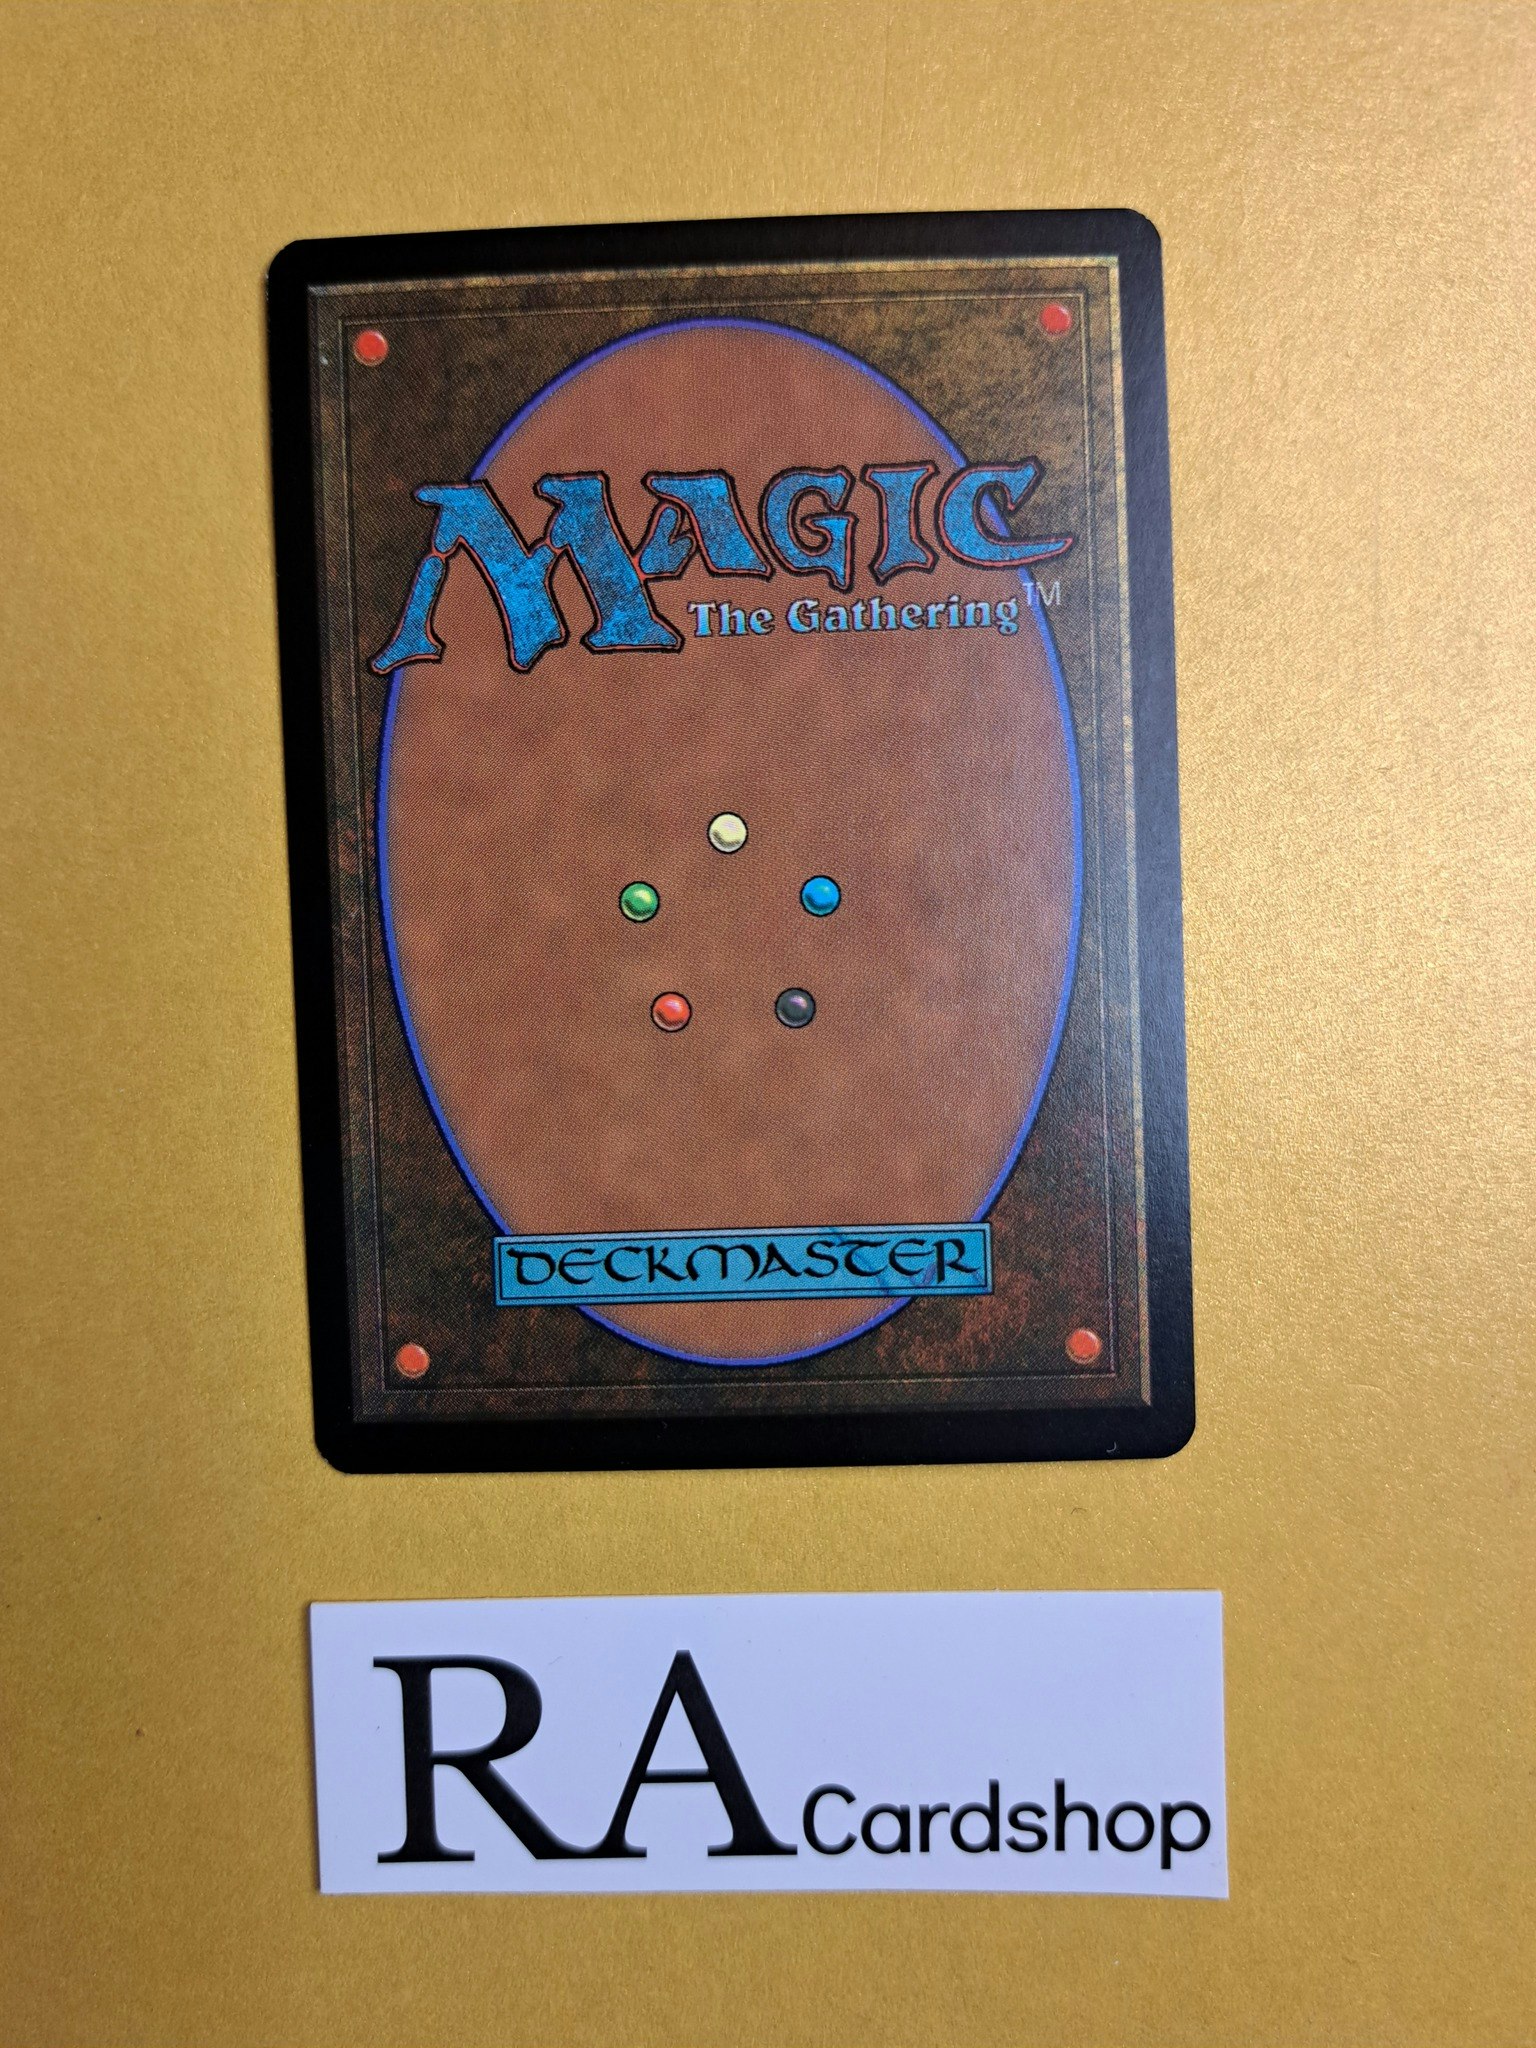 Charging Griffin Common 13/249 Magic 2014 (M14) Magic the Gathering